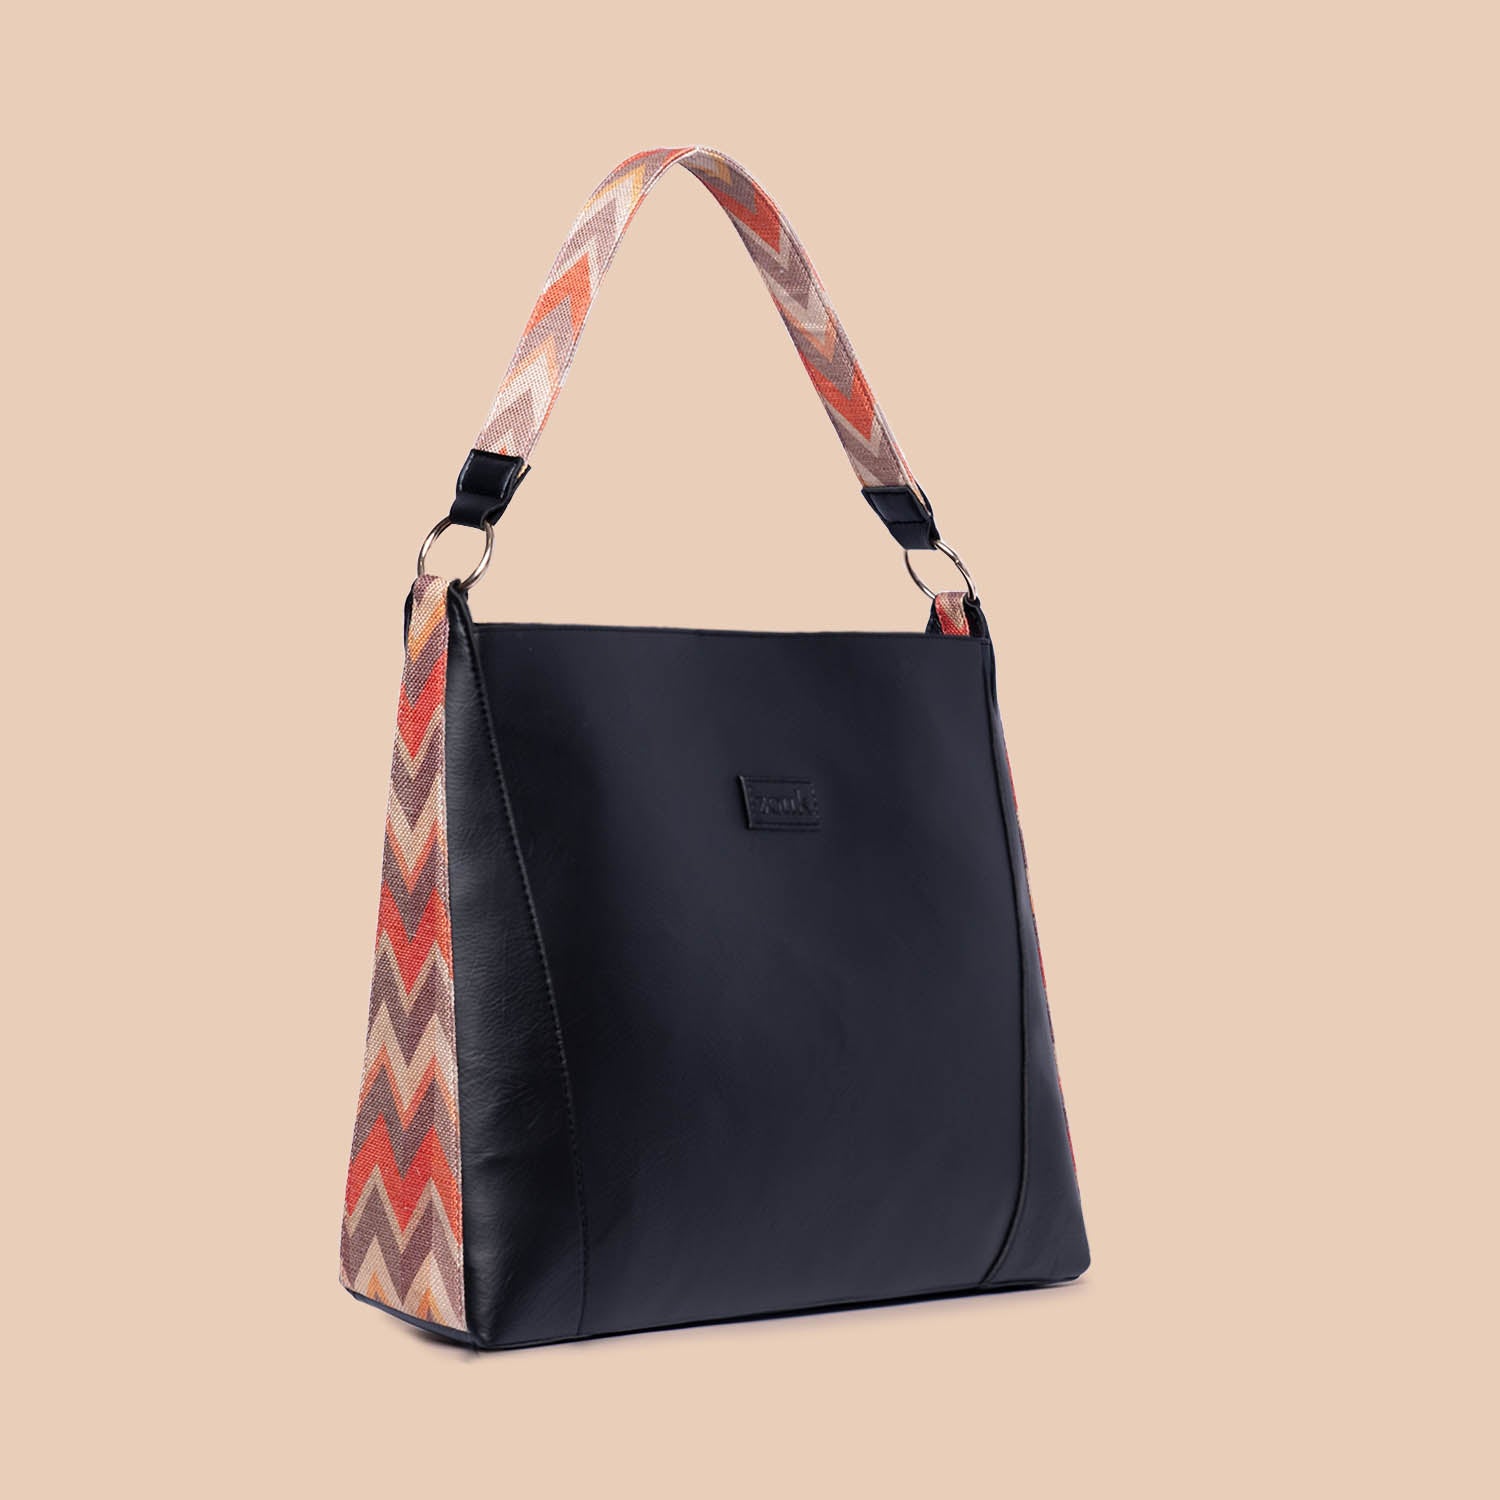 Tidal Wave Classic Open Tote